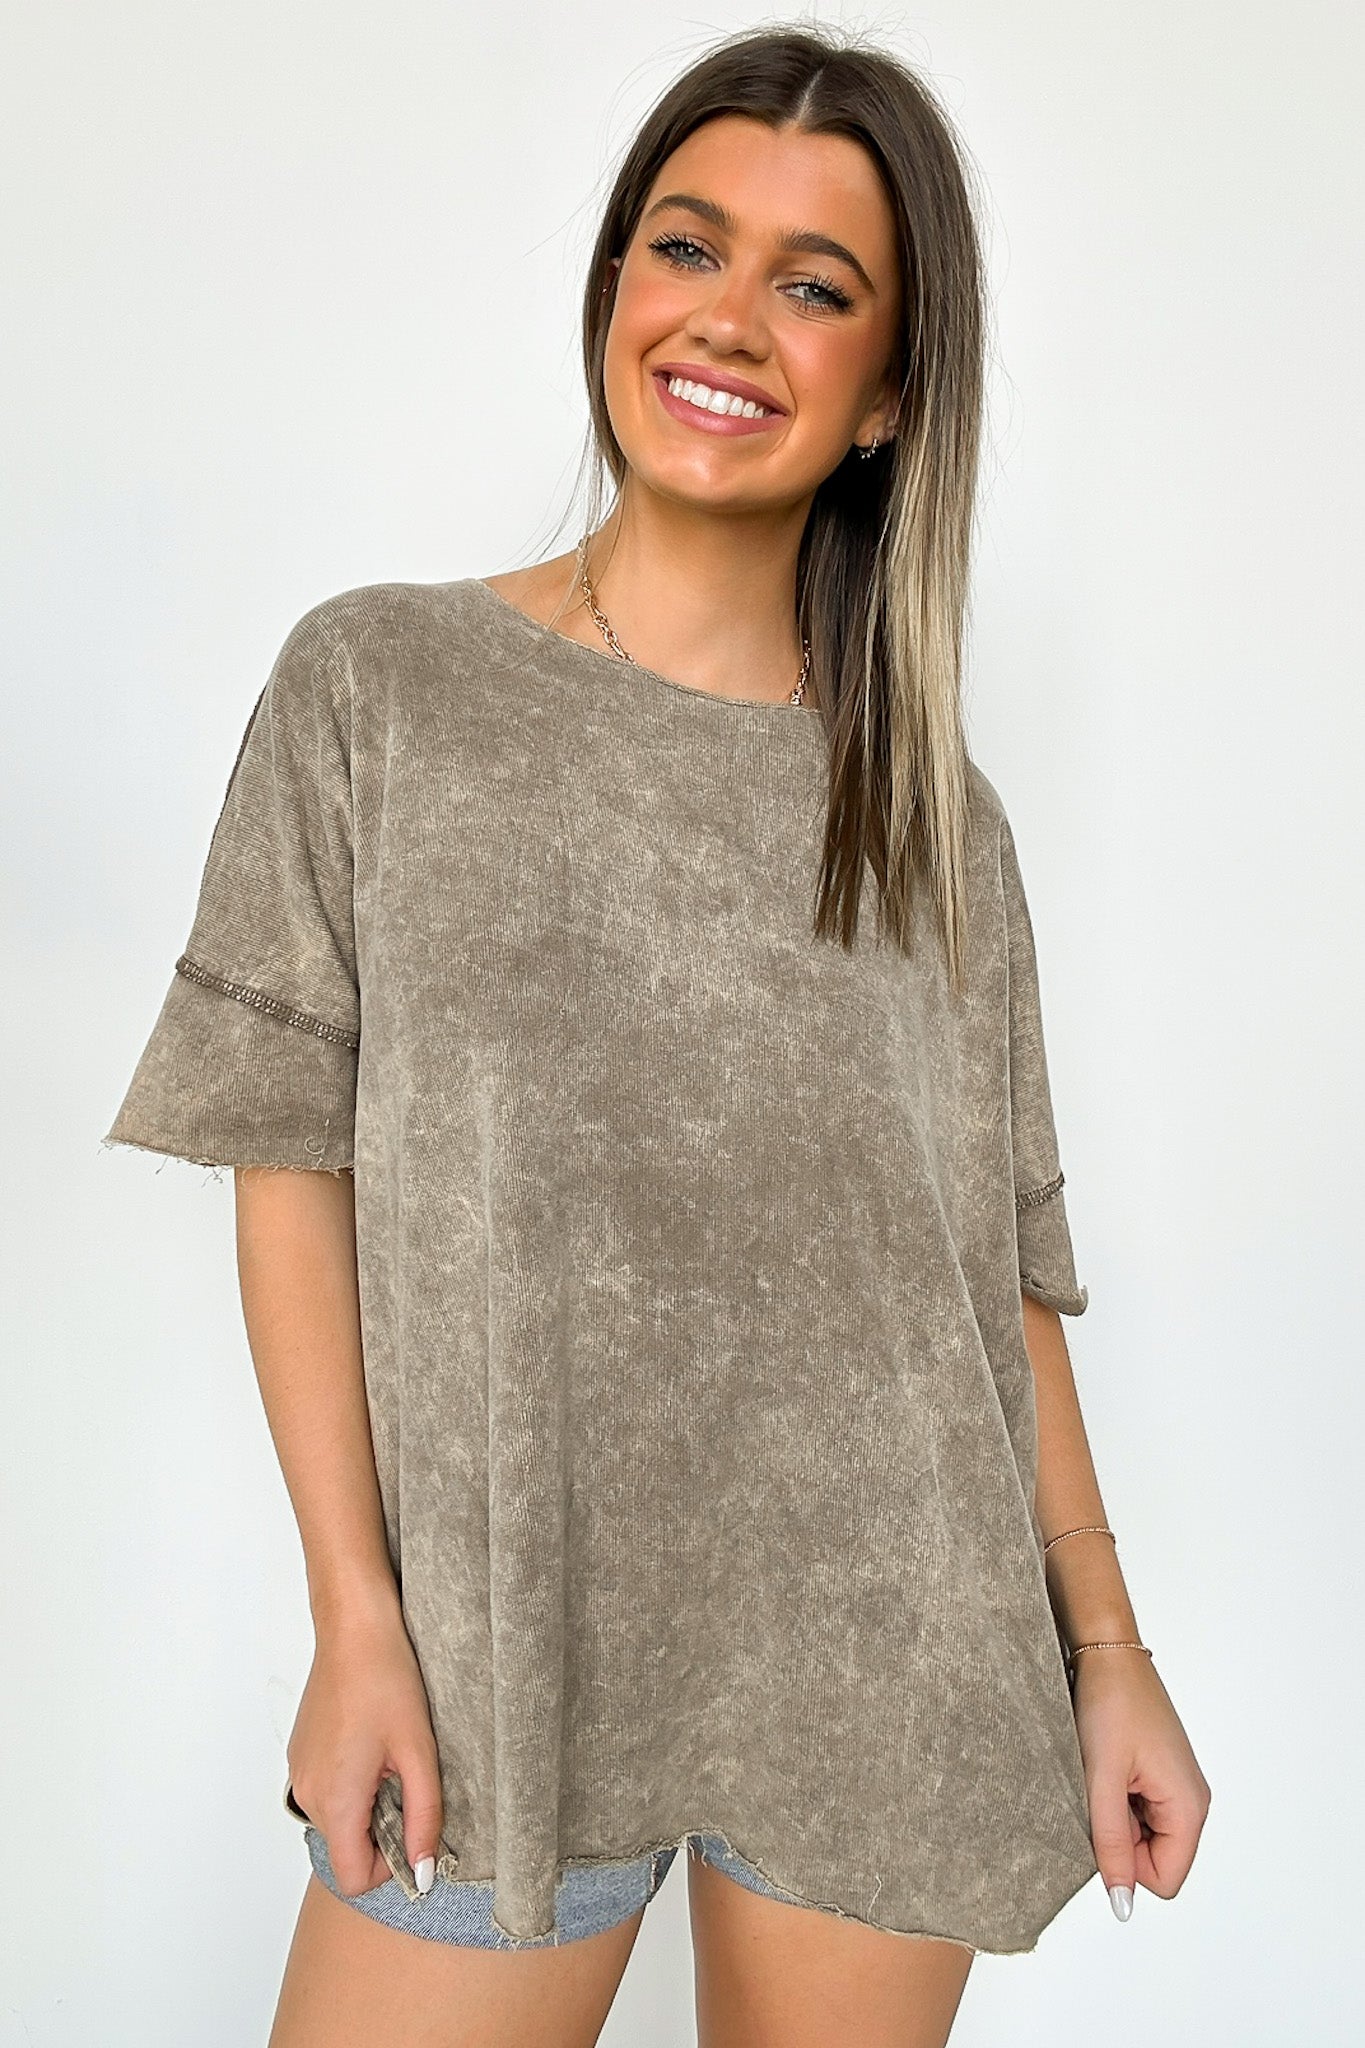 Mocha / SM Amayah Mineral Wash Raw Edge Top - BACK IN STOCK - Madison and Mallory